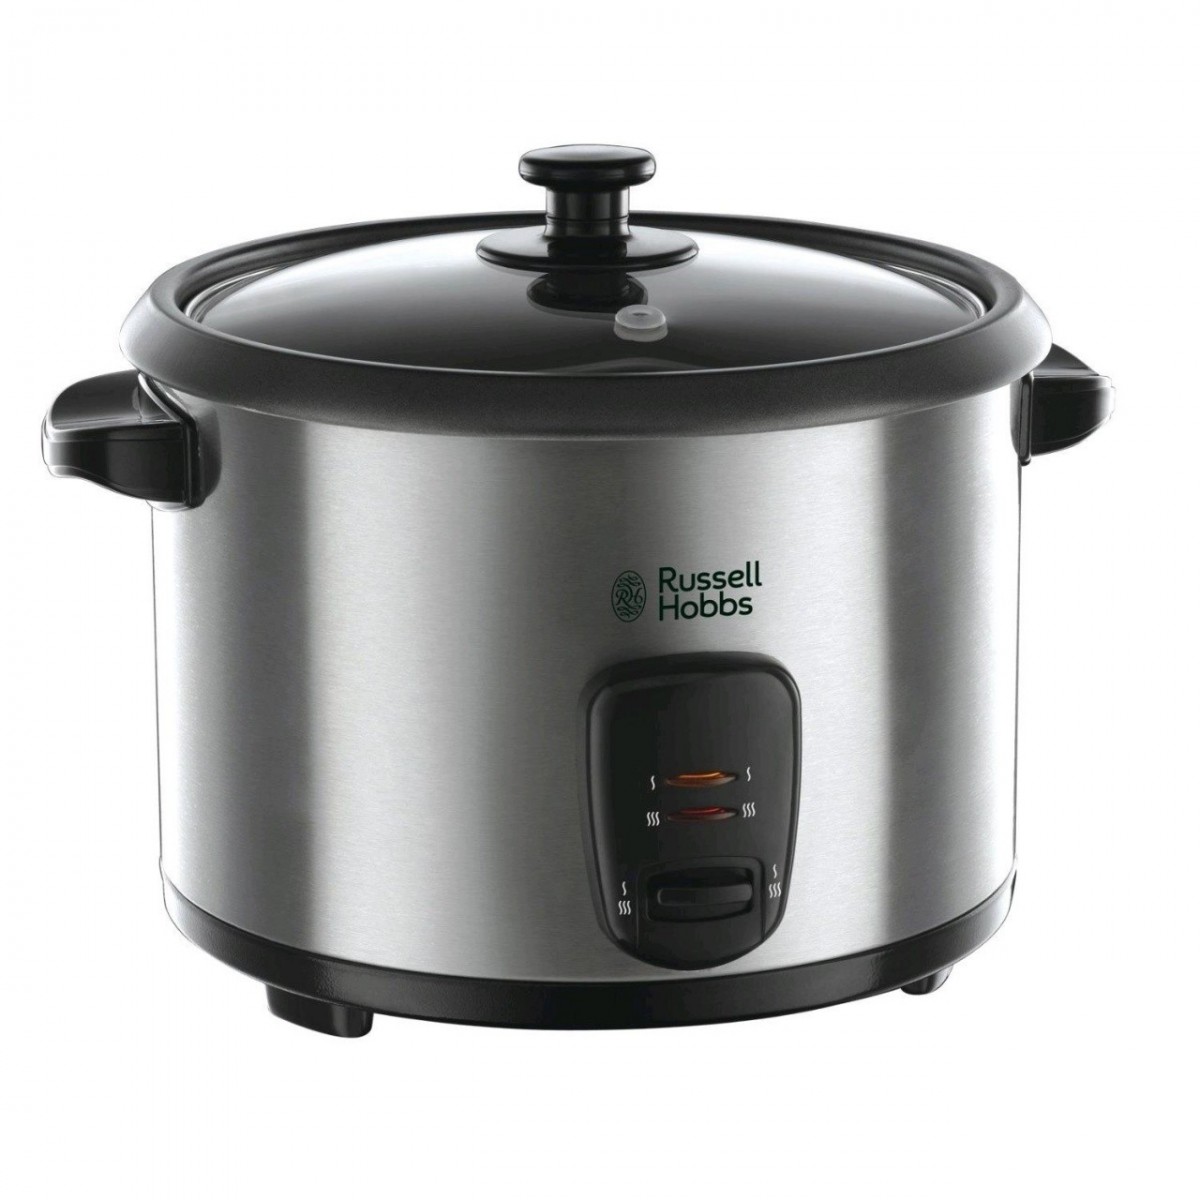 Russell Hobbs 19750-56 Cook at Home - Cuociriso Elettrico, 700 W